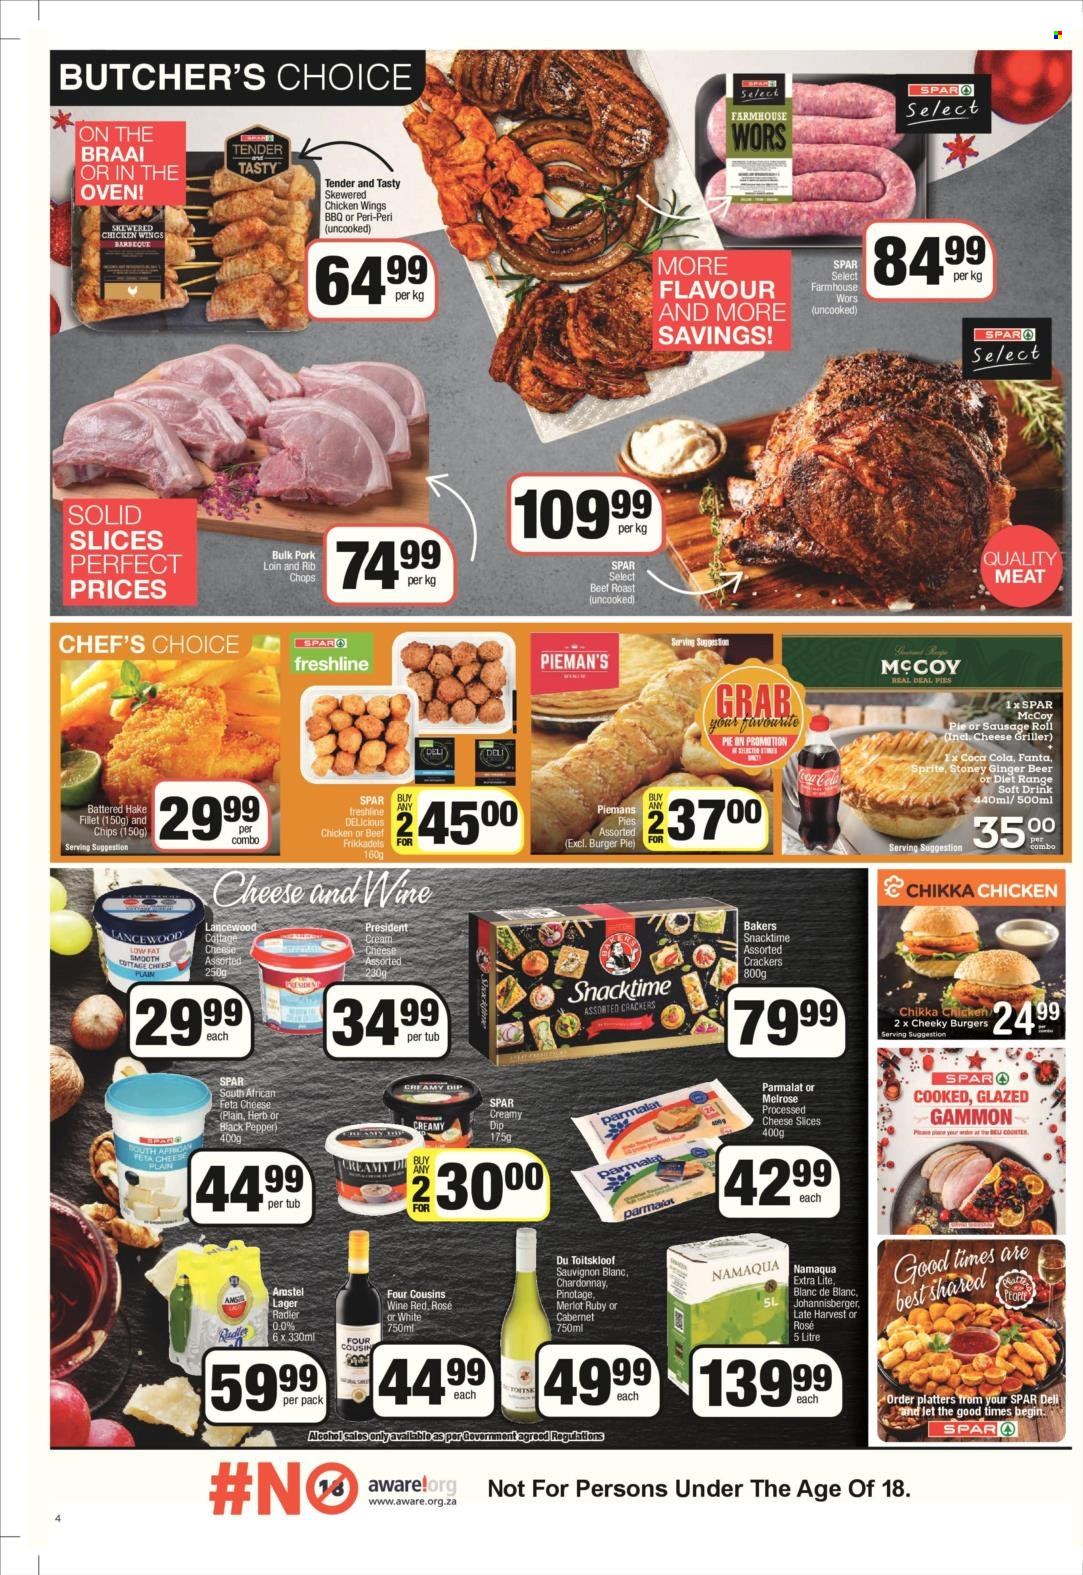 SPAR catalogue  - 13/12/2021 - 26/12/2021 - Sales products - sausage rolls, pie, Pieman's, hake, sausage, gammon, cream cheese, sliced cheese, cheese, Lancewood, Président, feta cheese, Melrose, creamy dip, chicken wings, crackers, chips, Snacktime, black pepper, herbs, Coca-Cola, Sprite, Fanta, Cabernet Sauvignon, red wine, white wine, Chardonnay, wine, Merlot, alcohol, Sauvignon Blanc, rosé wine, beer, Lager, pork loin, pork meat, rib chops, Bakers, braai, ginger beer. Page 4.